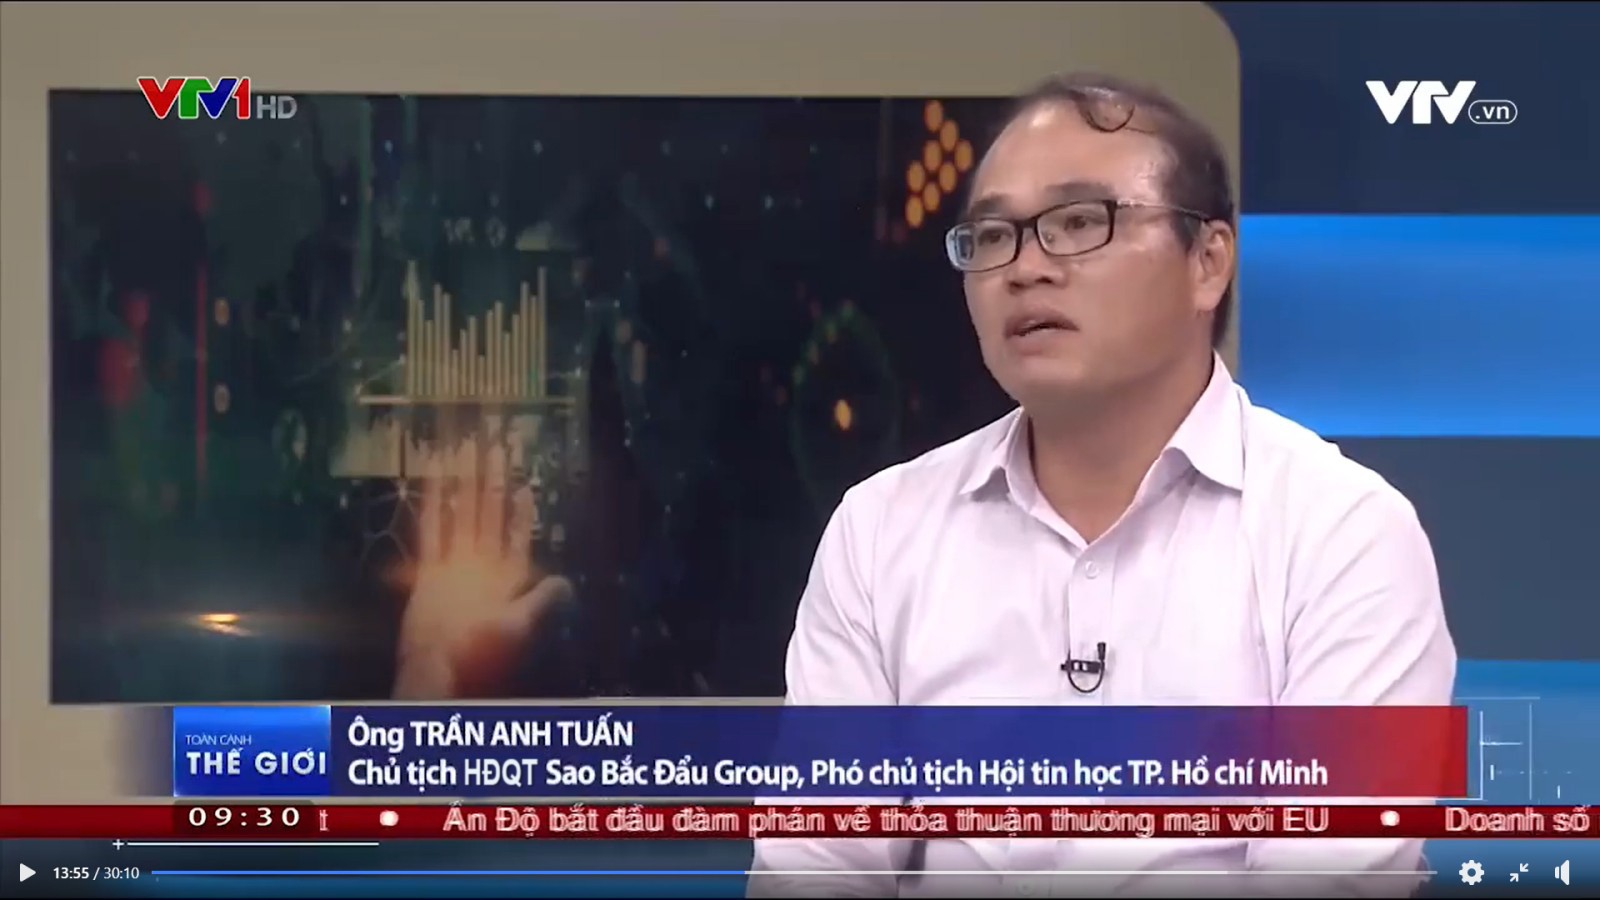 [VTV1] Chairman of Sao Bac Dau Board of Directors shared on the "COVID 19 - Vietnam's digital transformation opportunity" topic at the World Wide Program